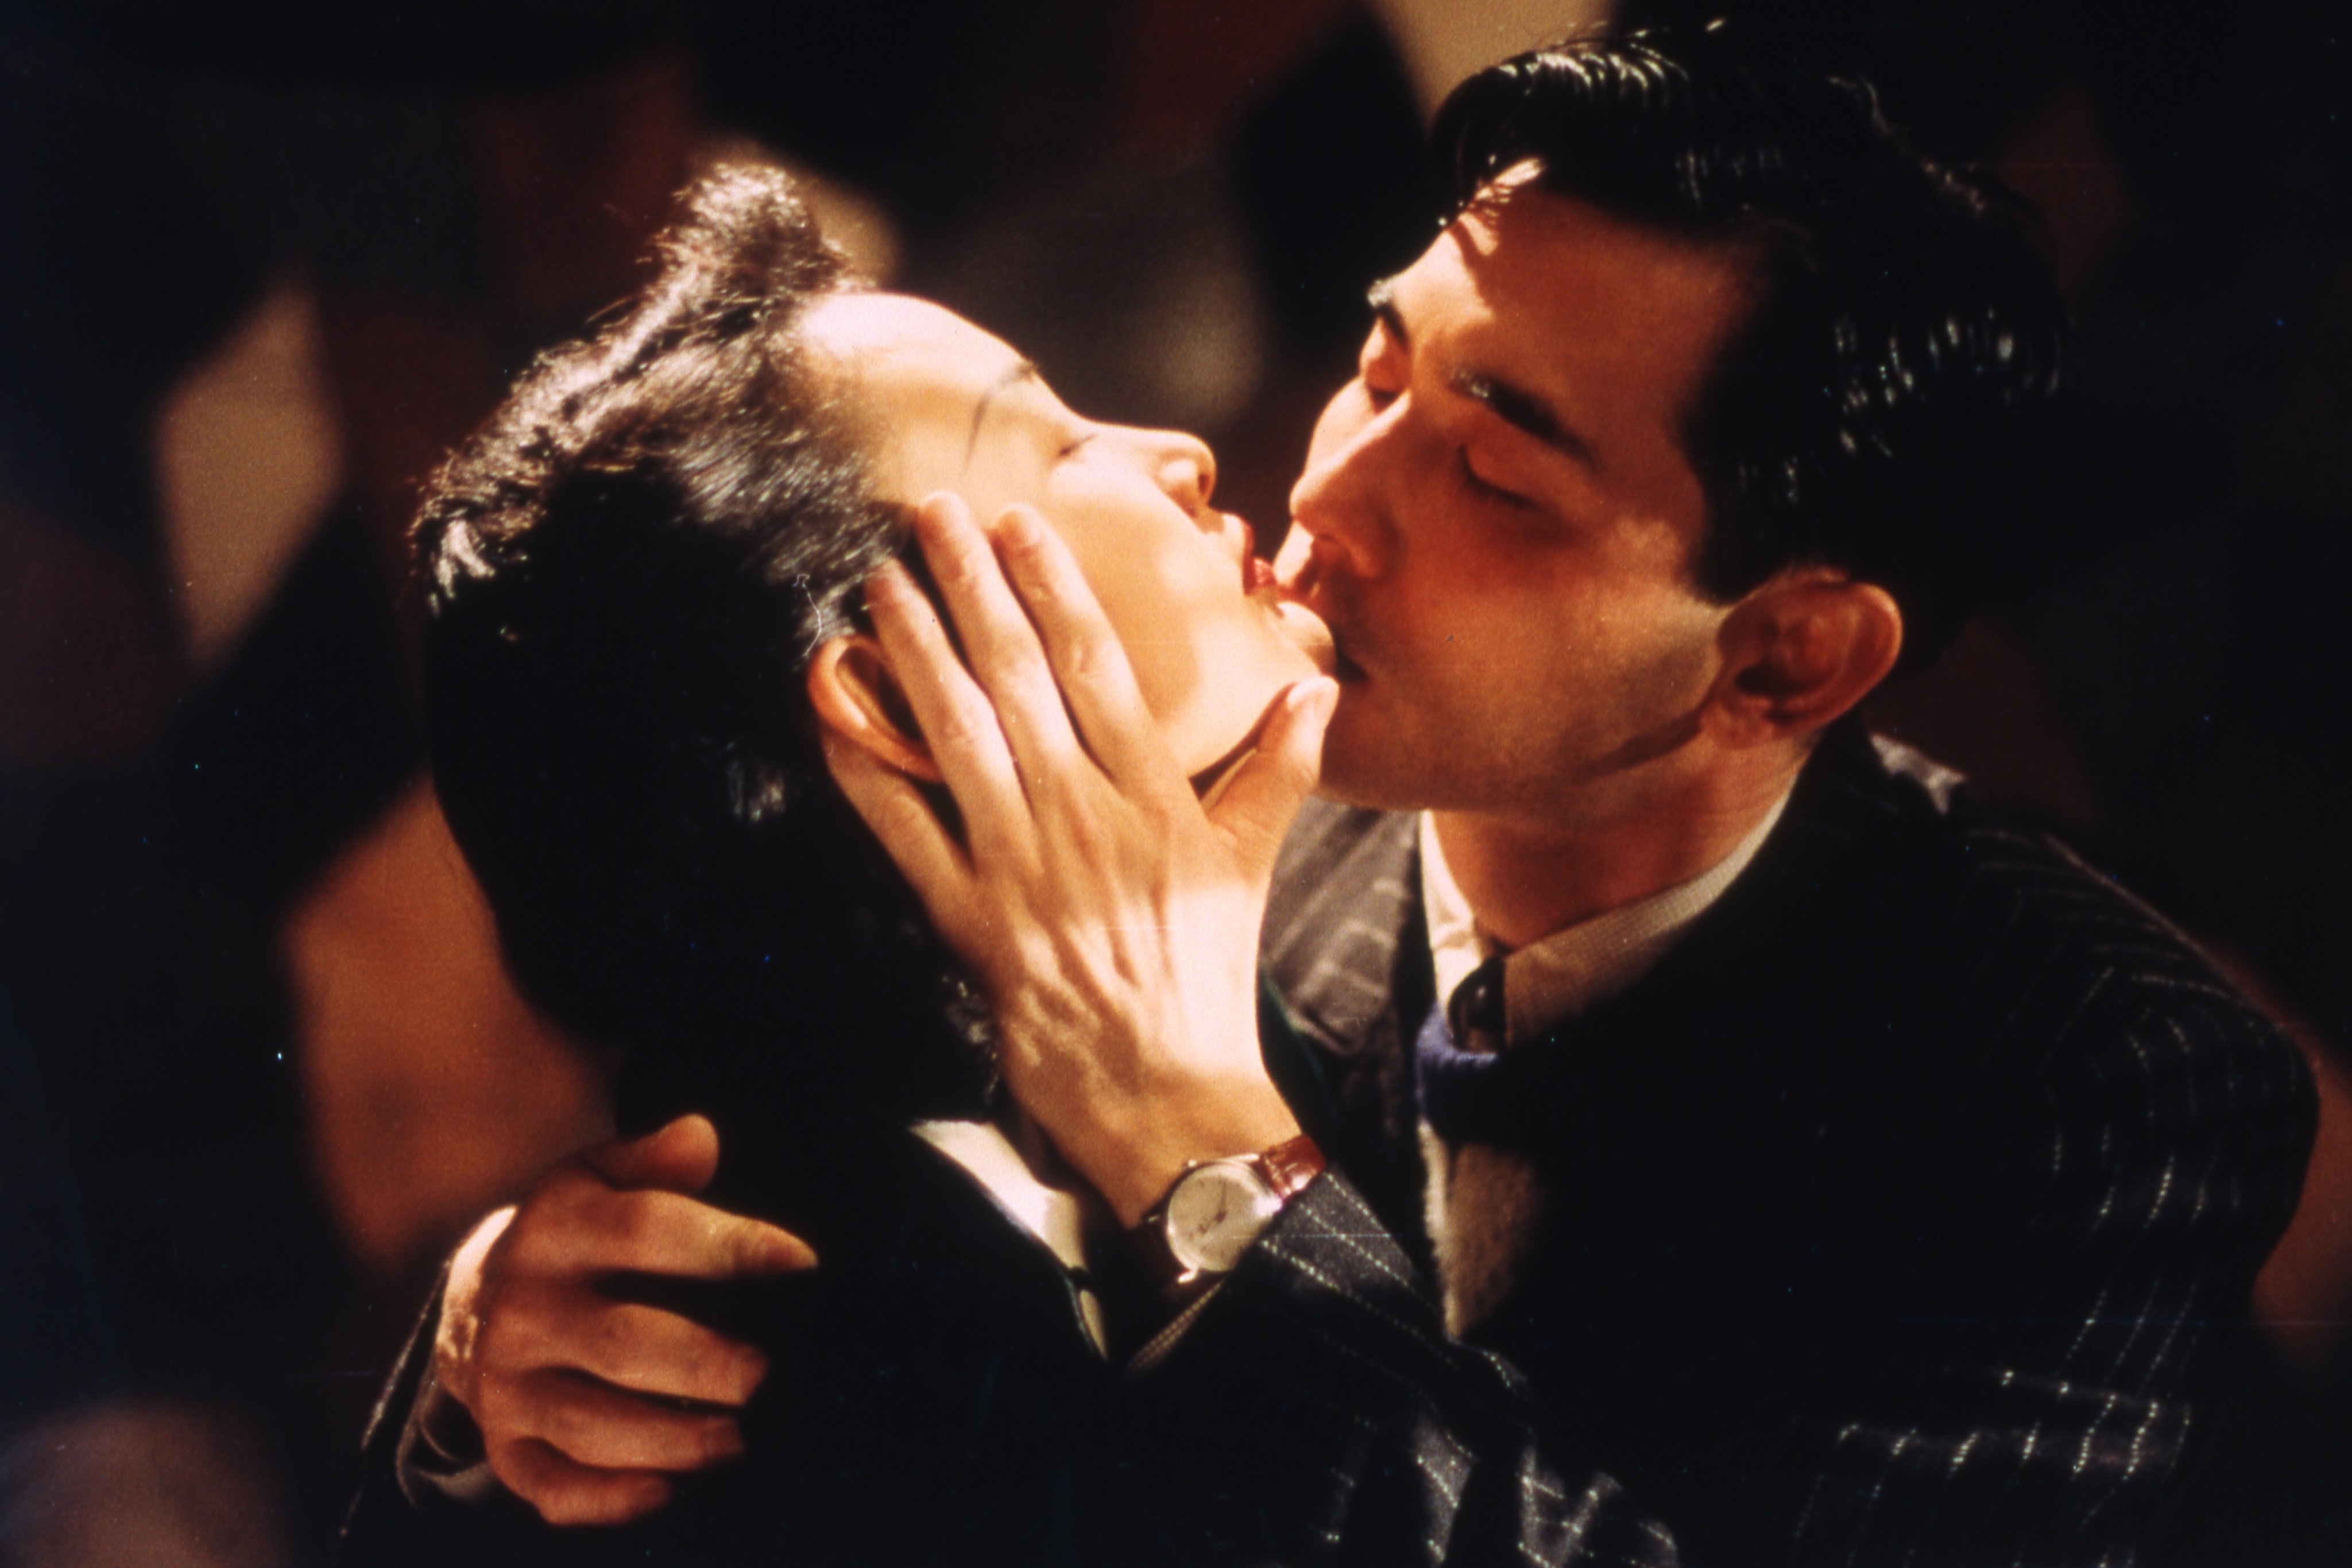 Joan Chen and Winston Chao in a still from “Red Rose White Rose”.